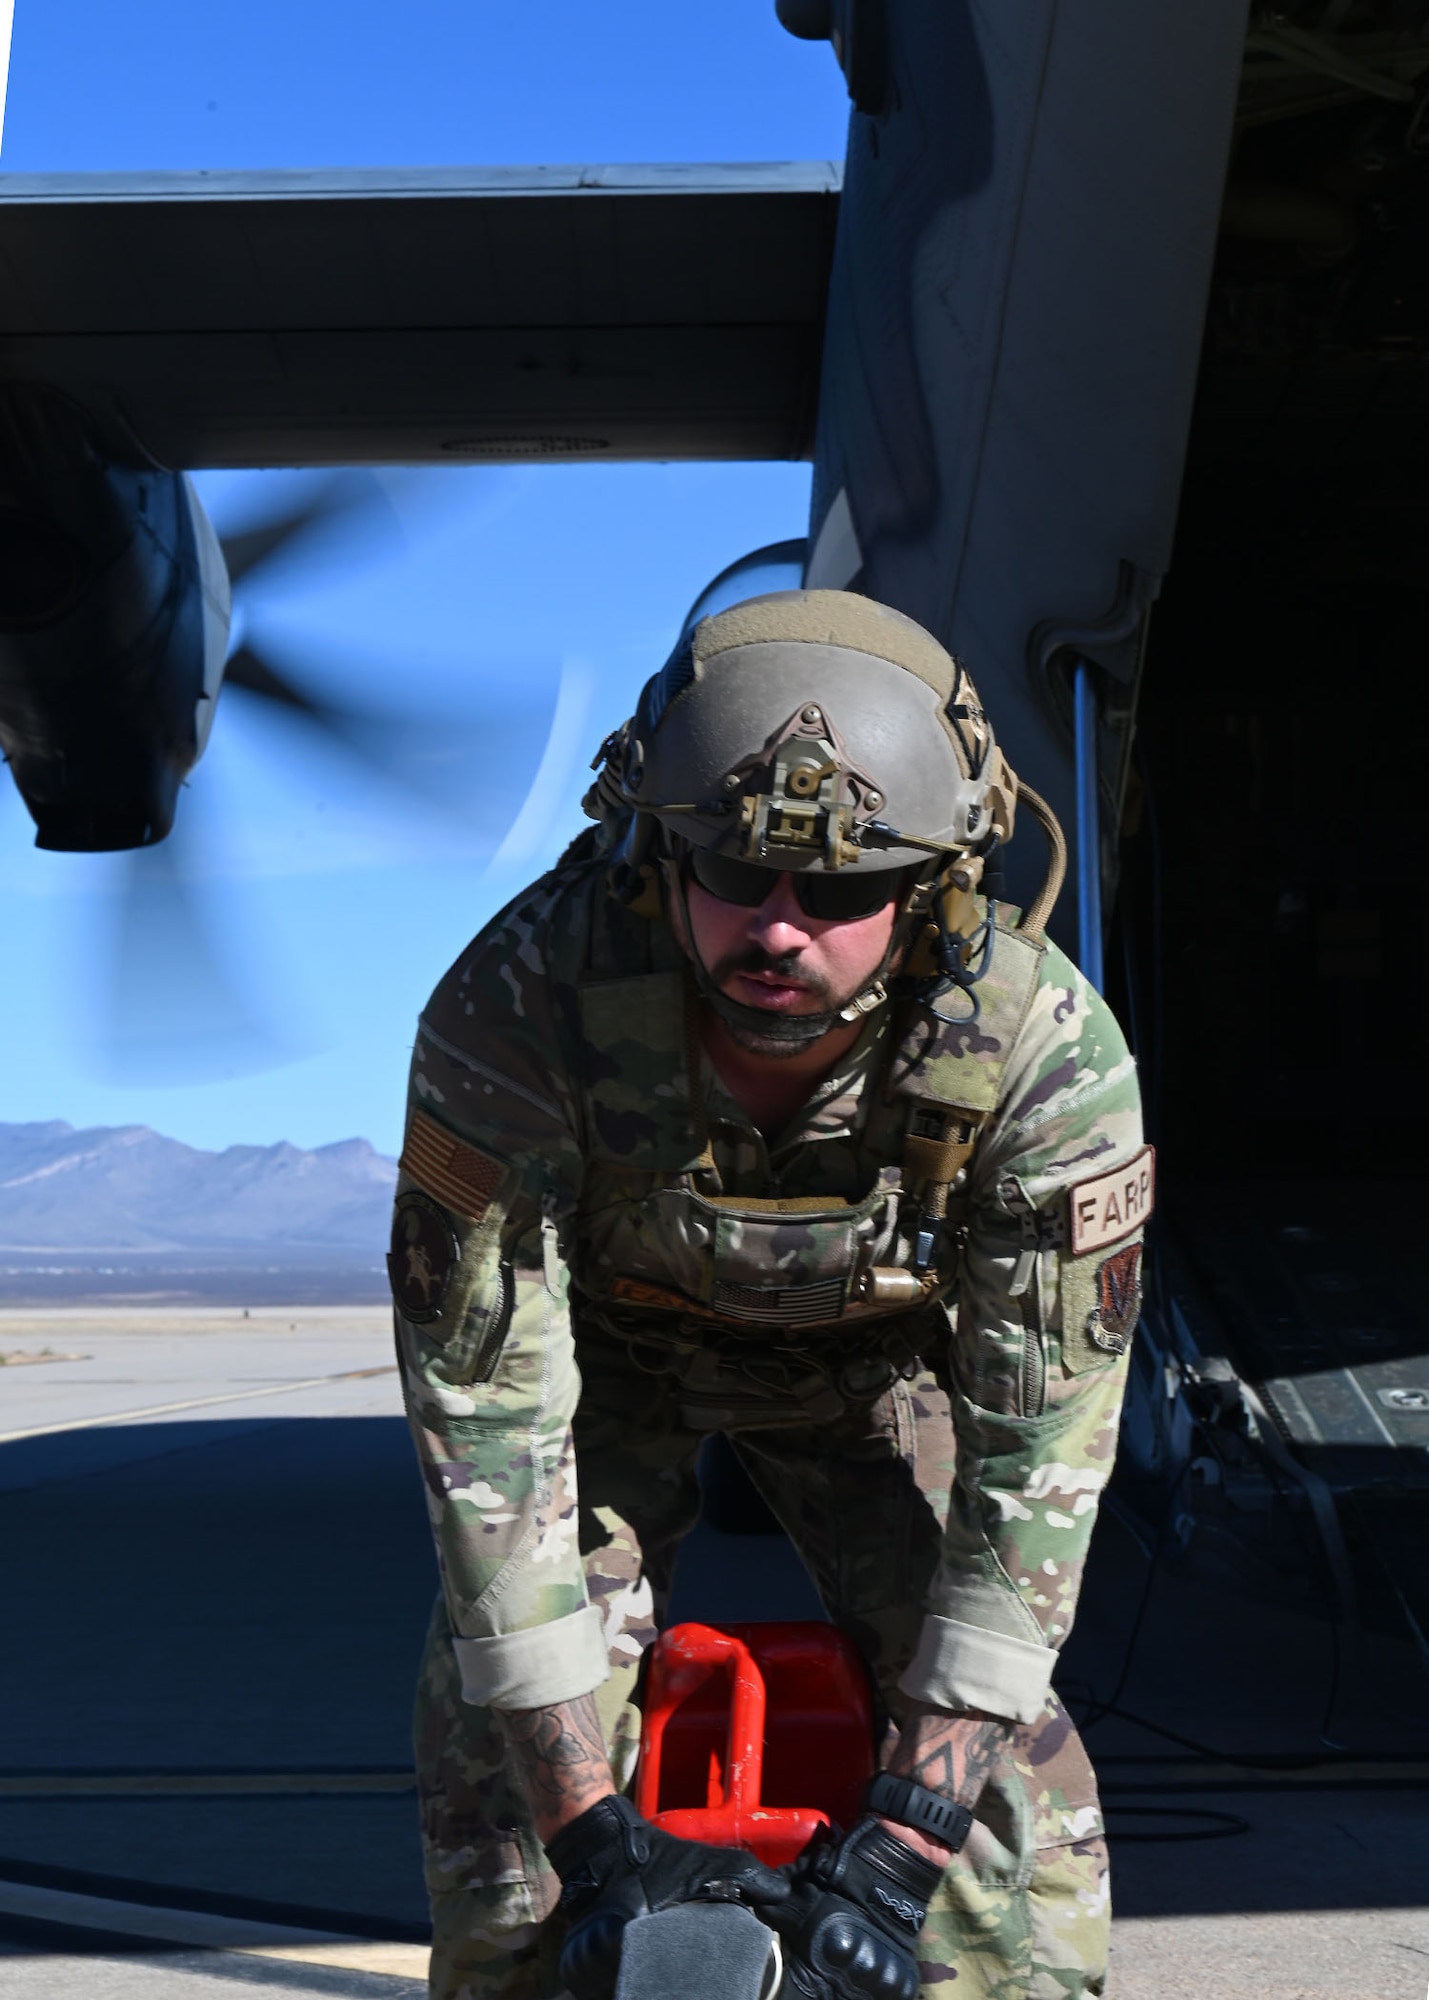 U.S. Air Force Tech. Sgt. Daniel Middaugh, 355th Logistics Readiness Squadron forward area refueling point operator, rolls a fuel hose during Exercise Agile Angel at Fort Huachuca, Ariz., Feb. 20, 2024. The fuel hose was approximately 300 feet long. (U.S. Air Force photo by Staff Sgt. Abbey Rieves)